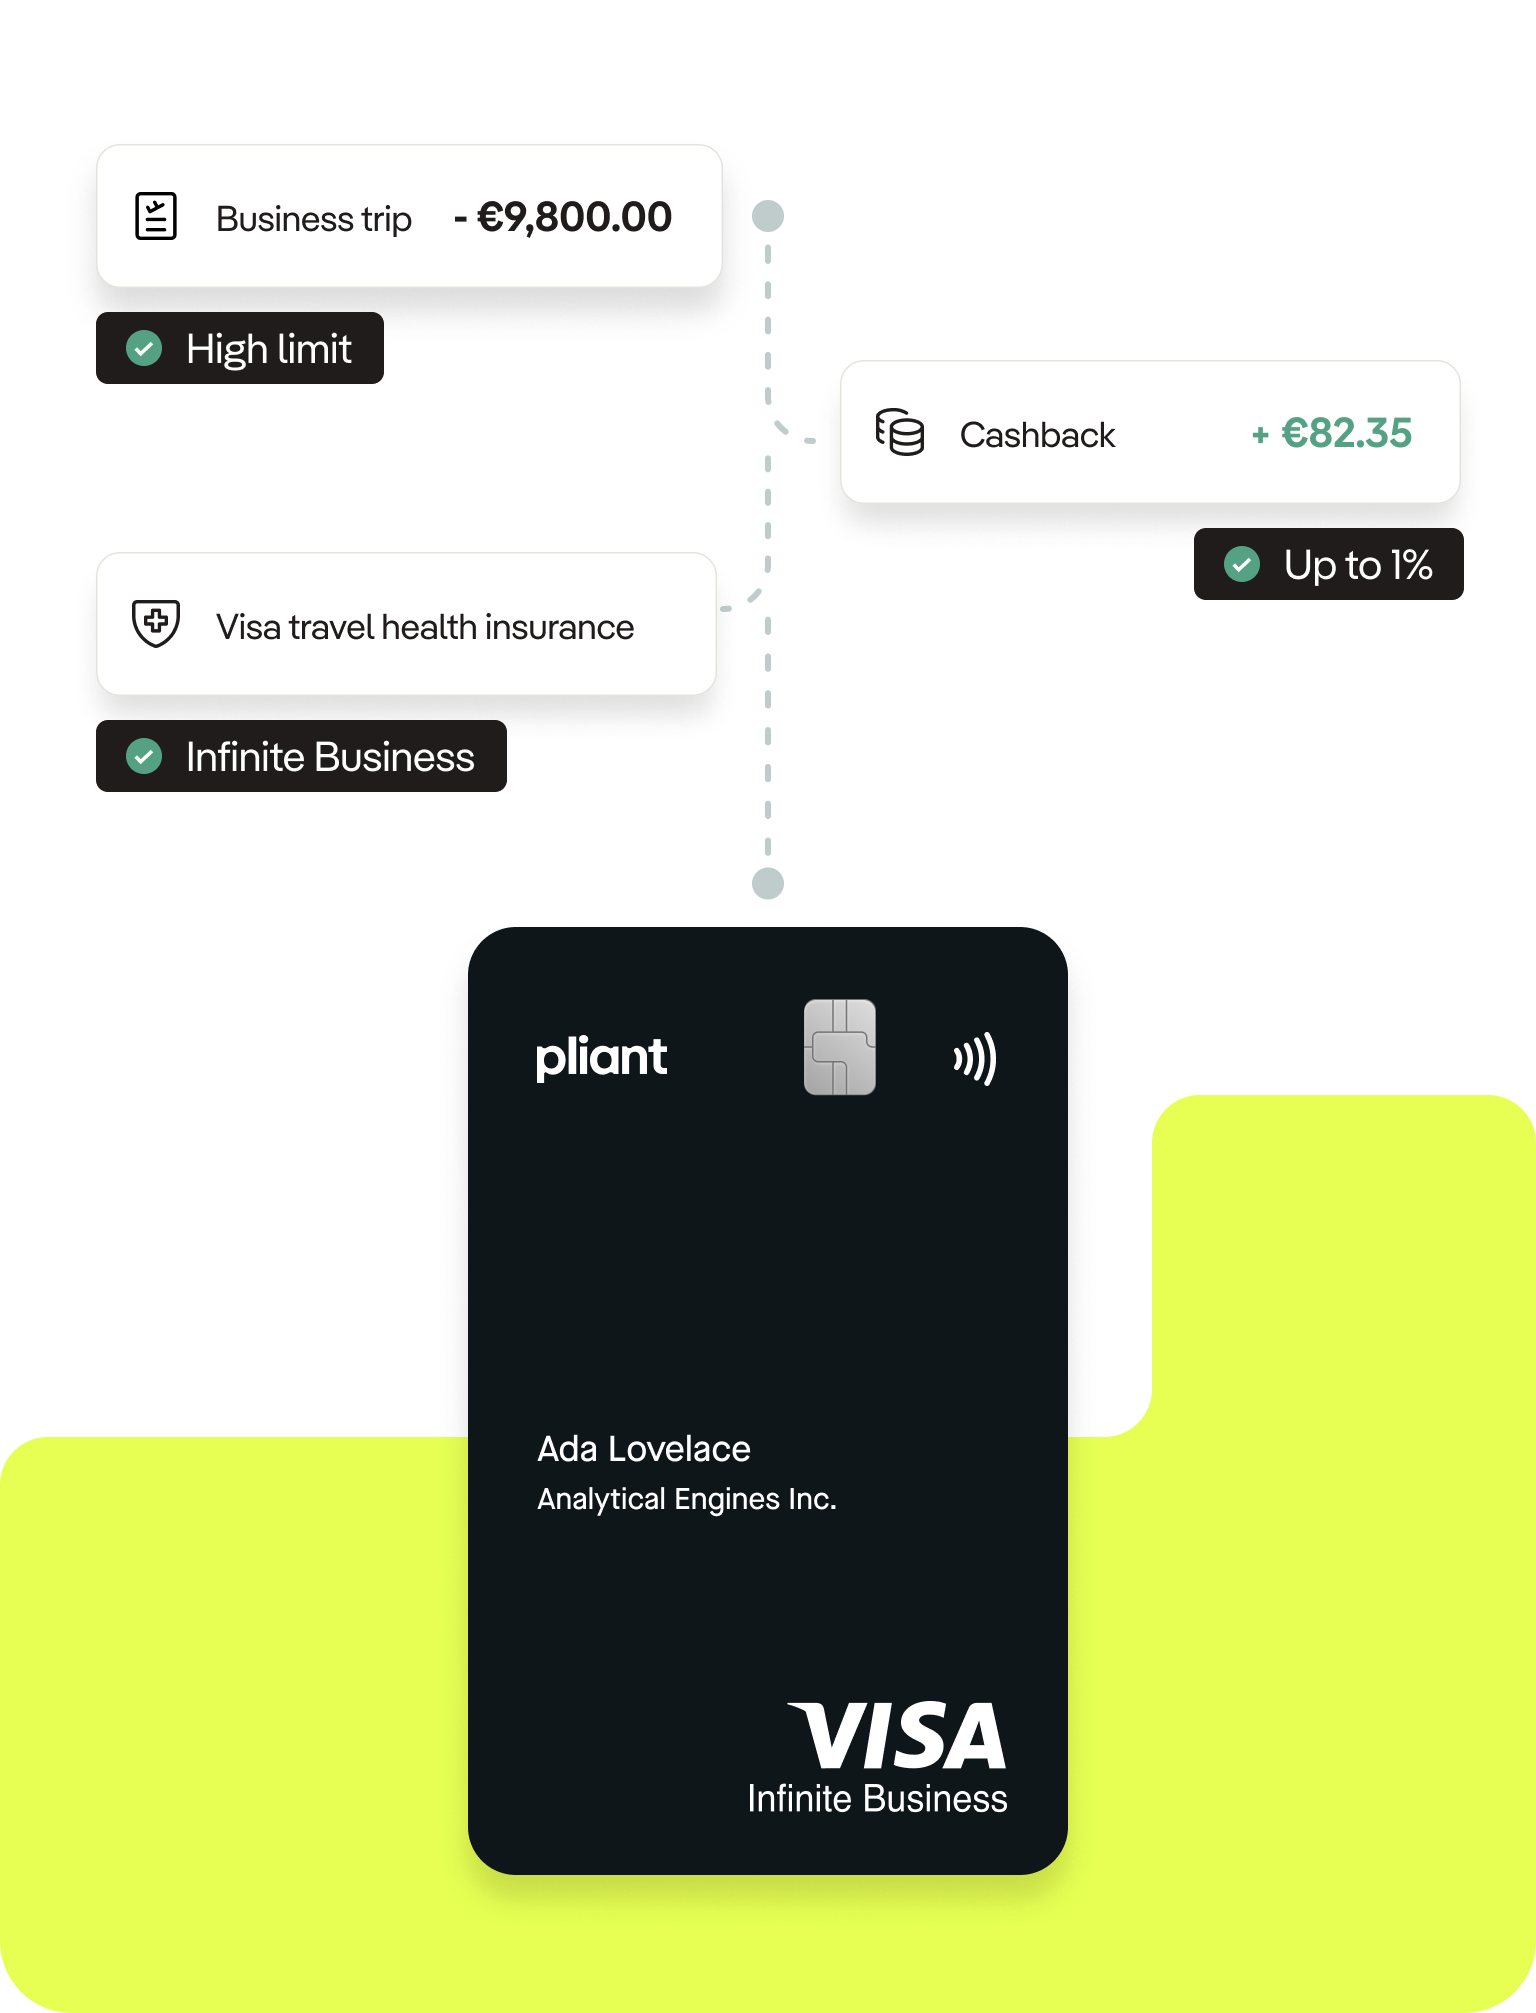 Pliant's credit cards with high limits and features such as cashback, premium perks, insurance and airport lounge access